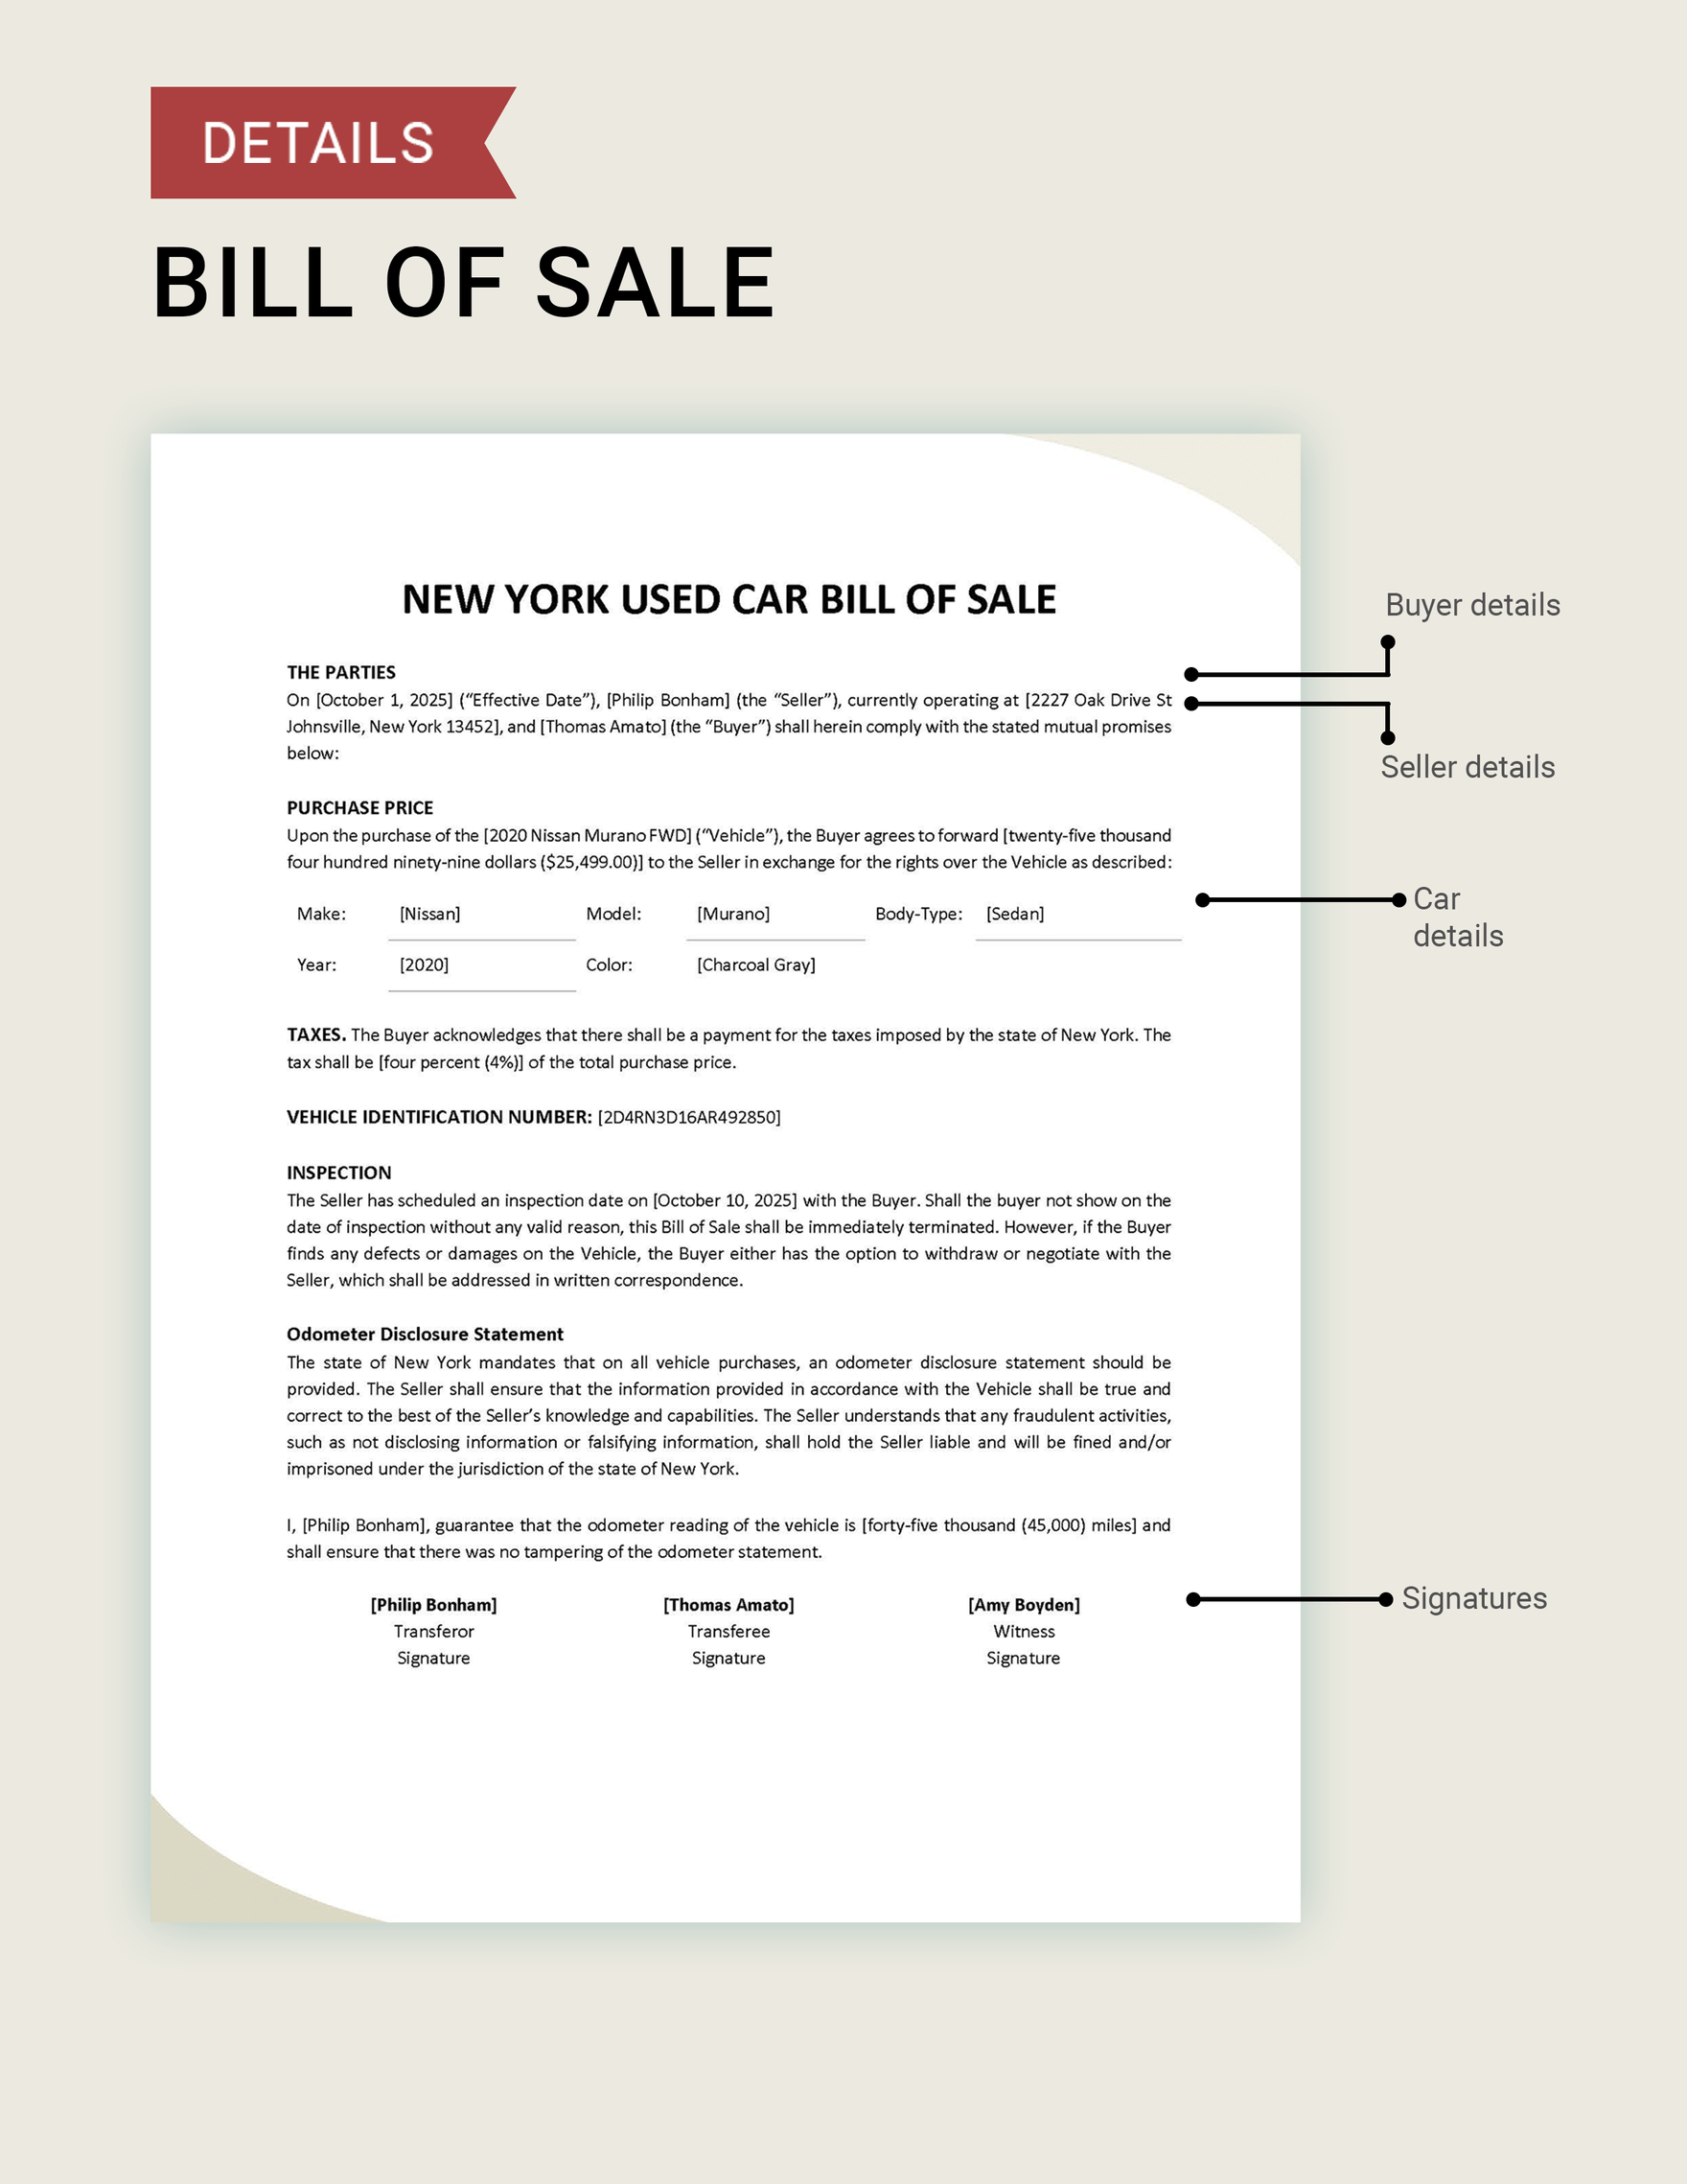 New York Used Car Bill of Sale Template